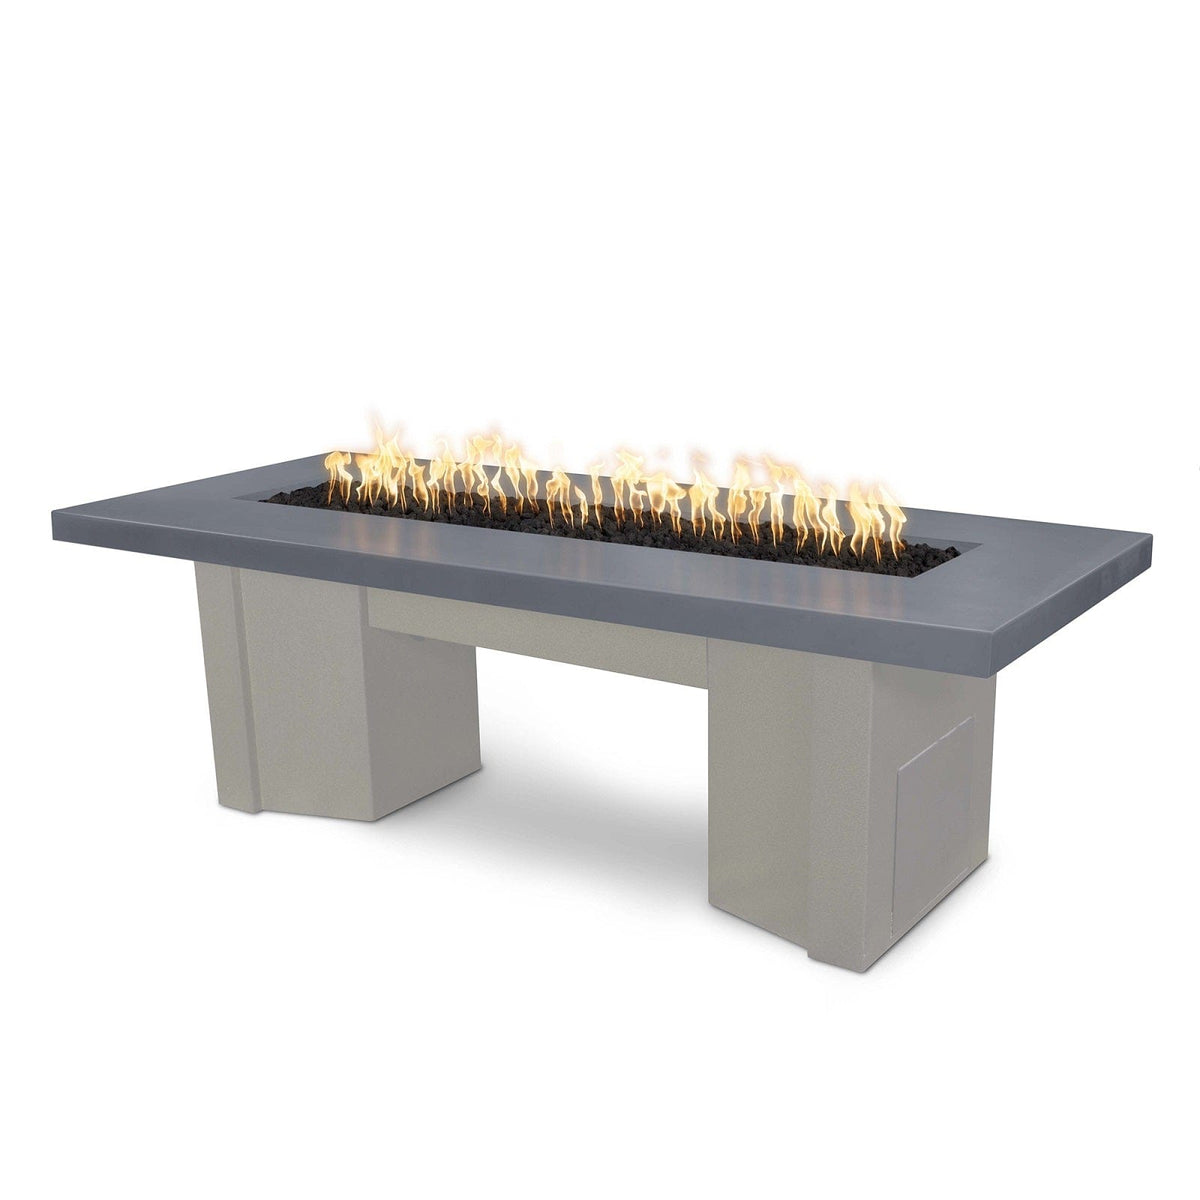 The Outdoor Plus Fire Features Gray (-GRY) / Pewter Powder Coated Steel (-PEW) The Outdoor Plus 60&quot; Alameda Fire Table Smooth Concrete in Liquid Propane - Flame Sense System with Push Button Spark Igniter / OPT-ALMGFRC60FSEN-LP